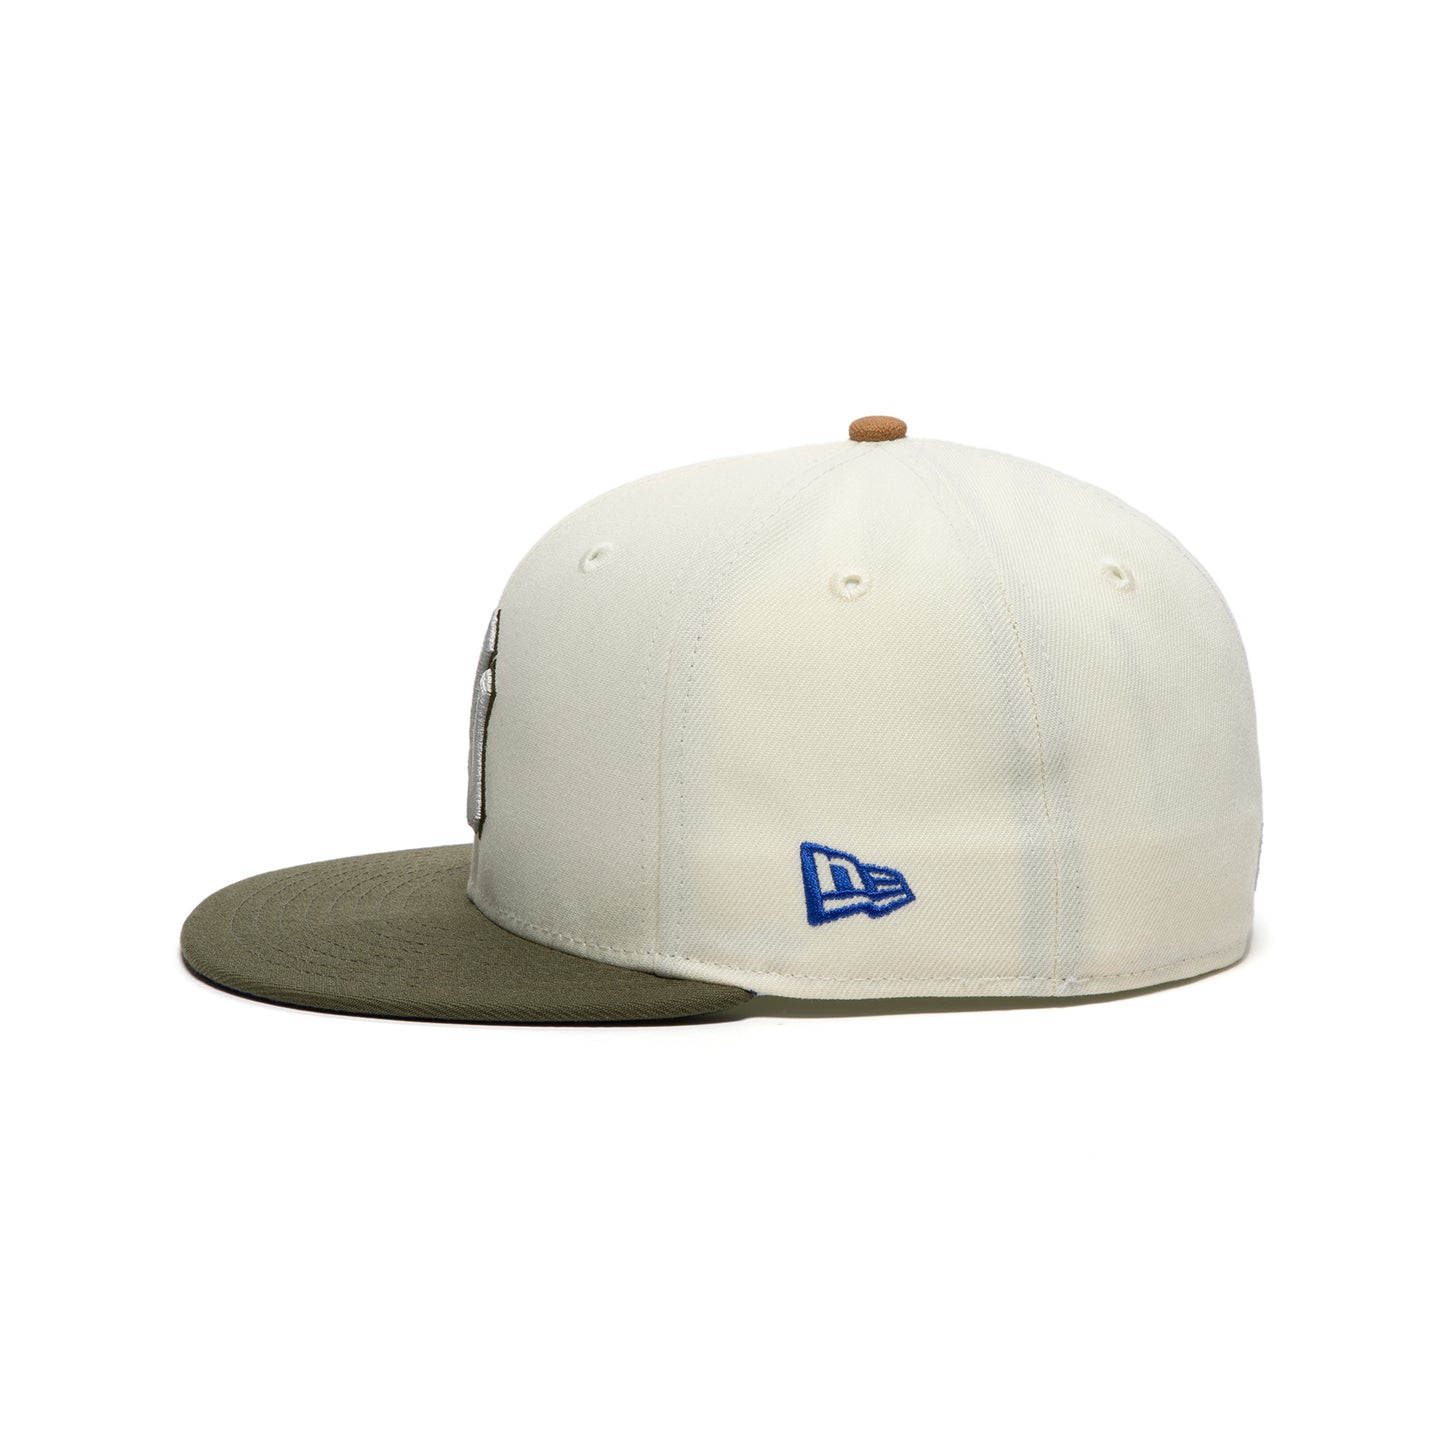 Concepts x New Era 5950 New York Yankees Fitted Hat (Chrome White)